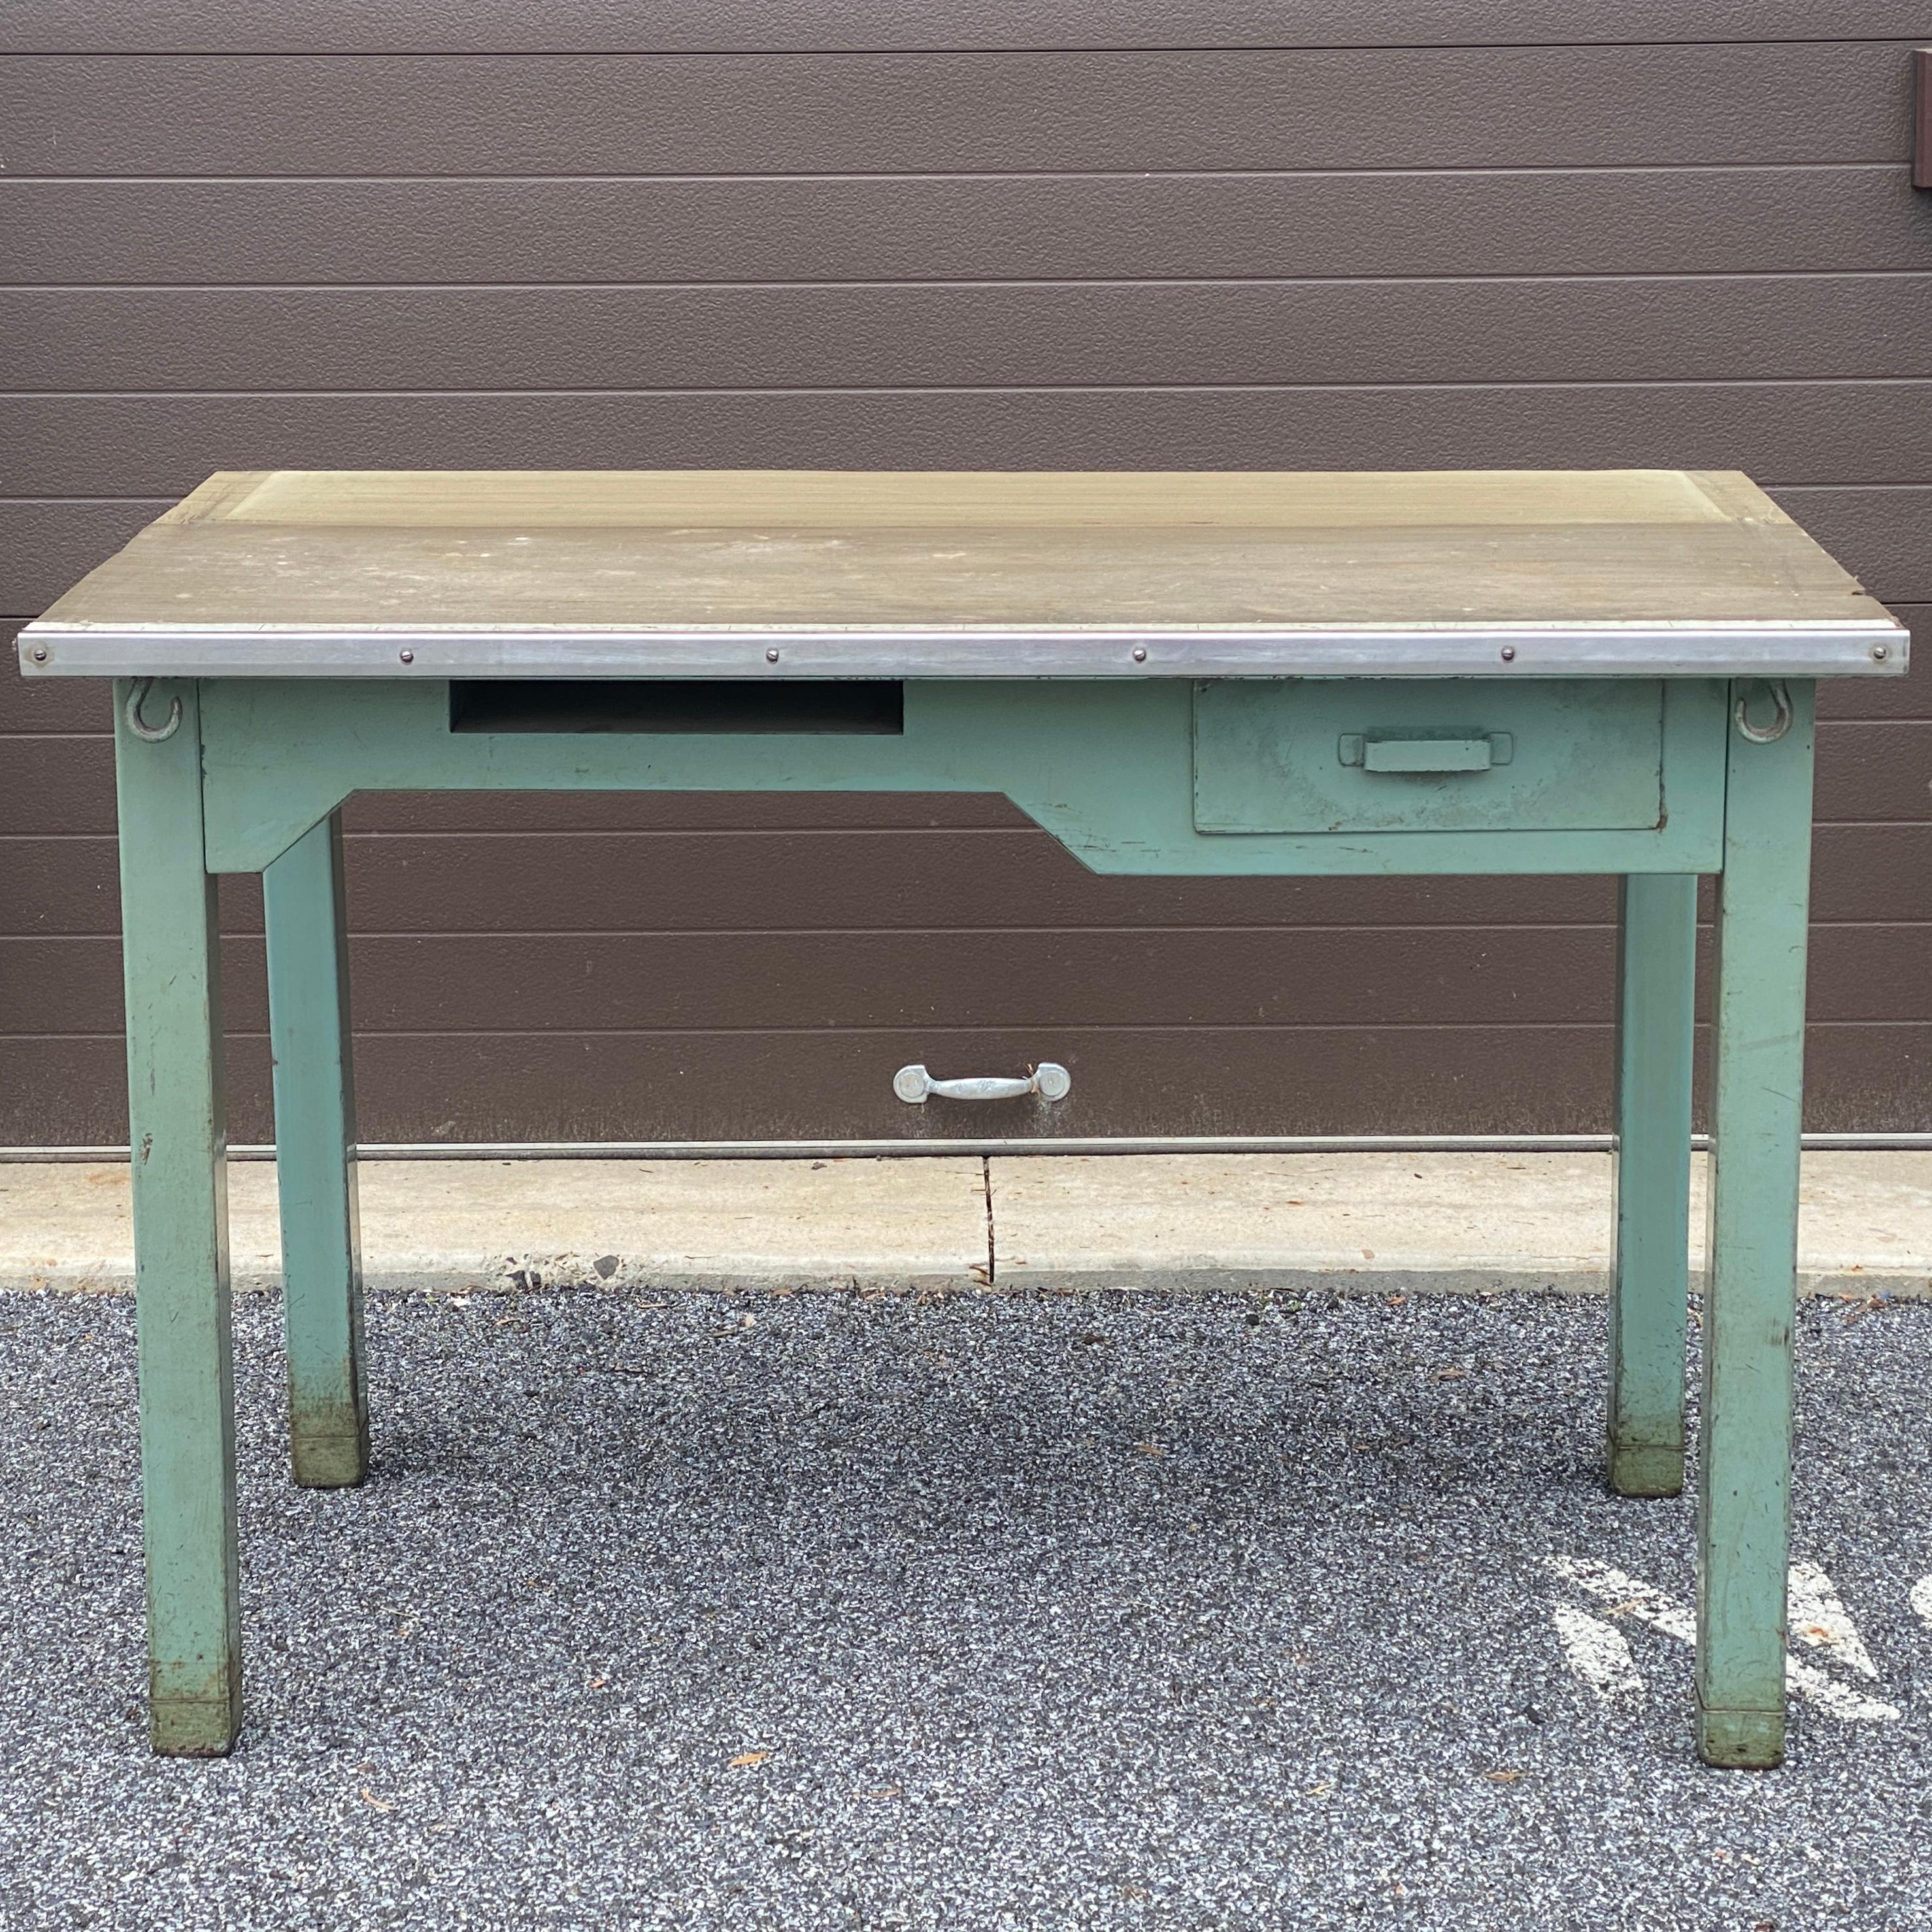 Vintage industrial salvage USPS Post Office steel mail sorting station desk circa 1956 with single drawer, cubby, and various hooks underneath. 
Knee clearance variable
27.5” on left side 
25.25” under drawer